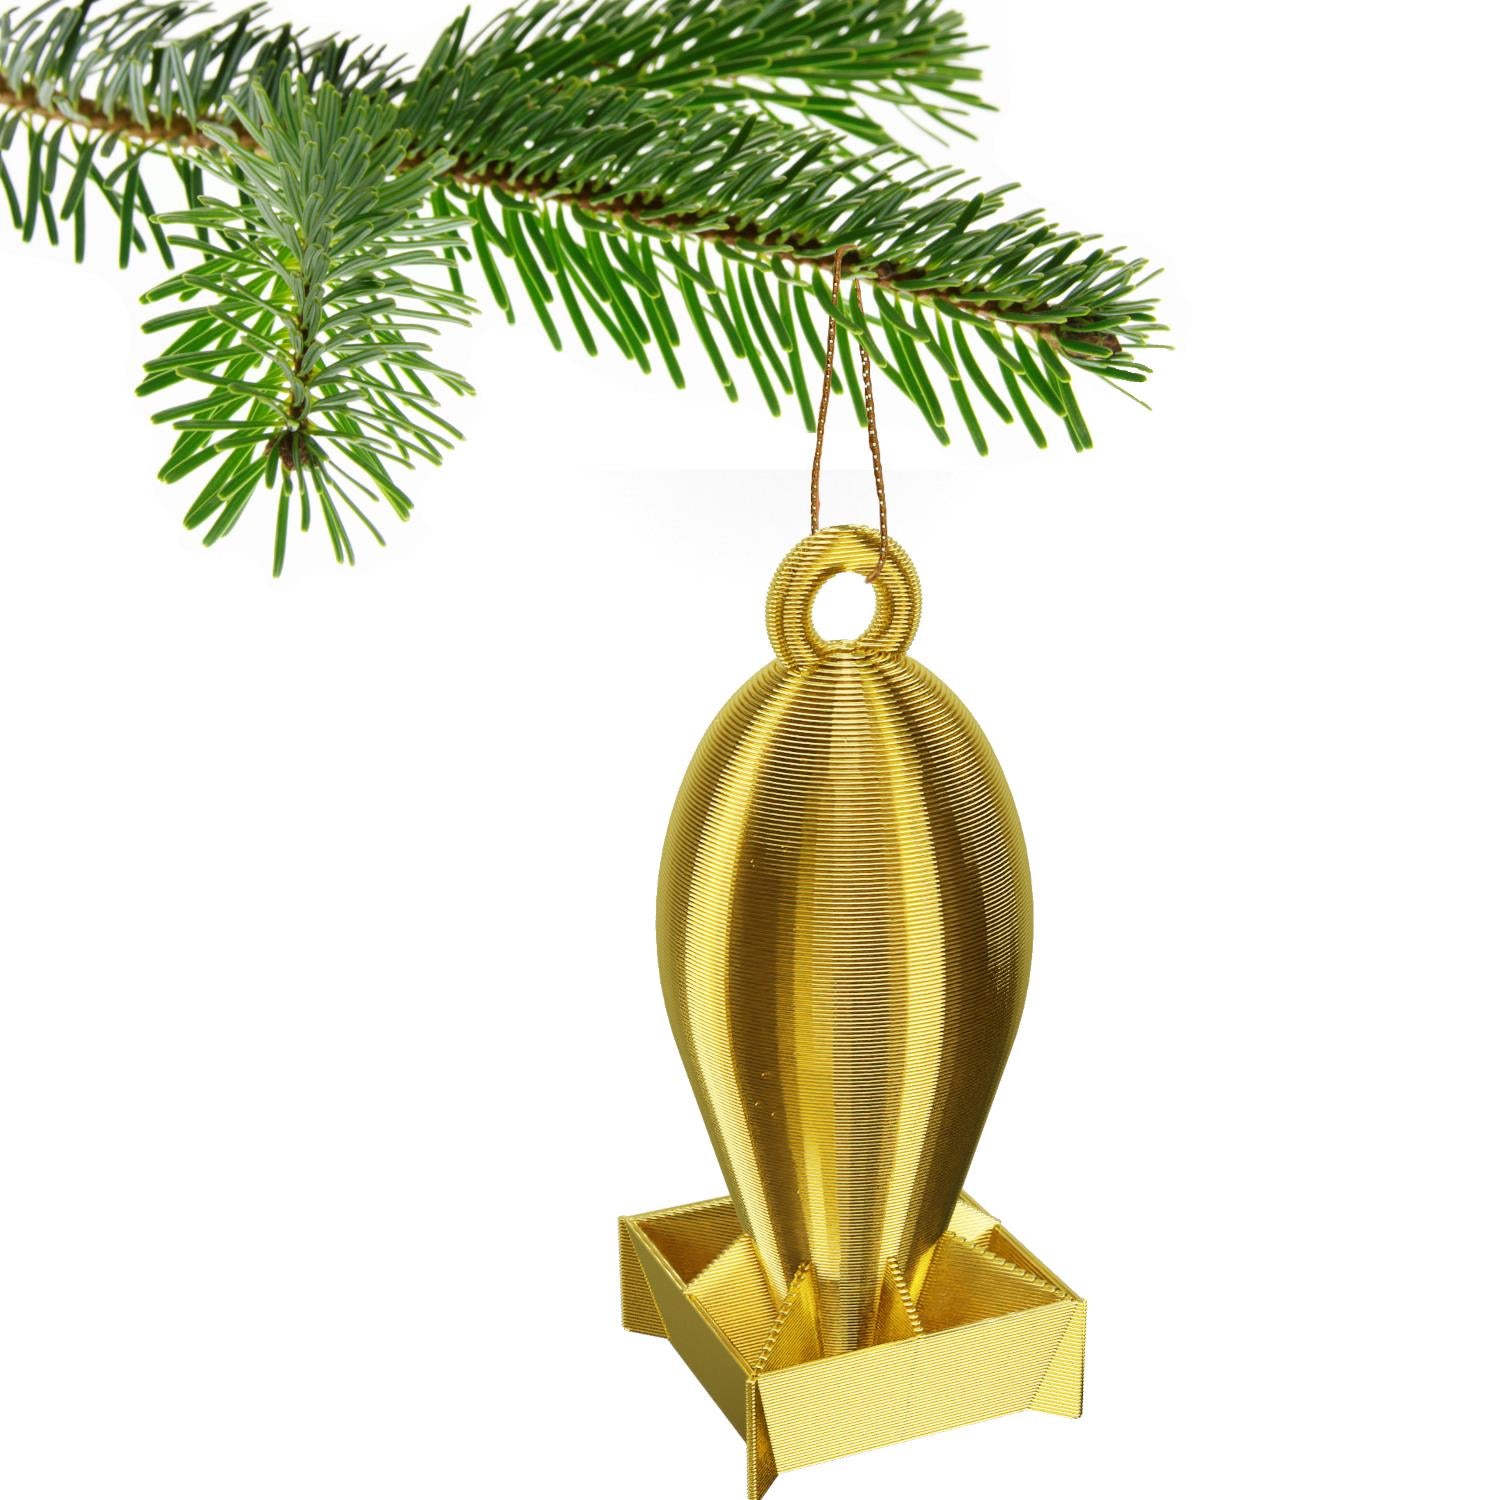 Barrage Balloon Christmas Bauble Decoration Ornament For Christmas Xmas Noel (Gold)